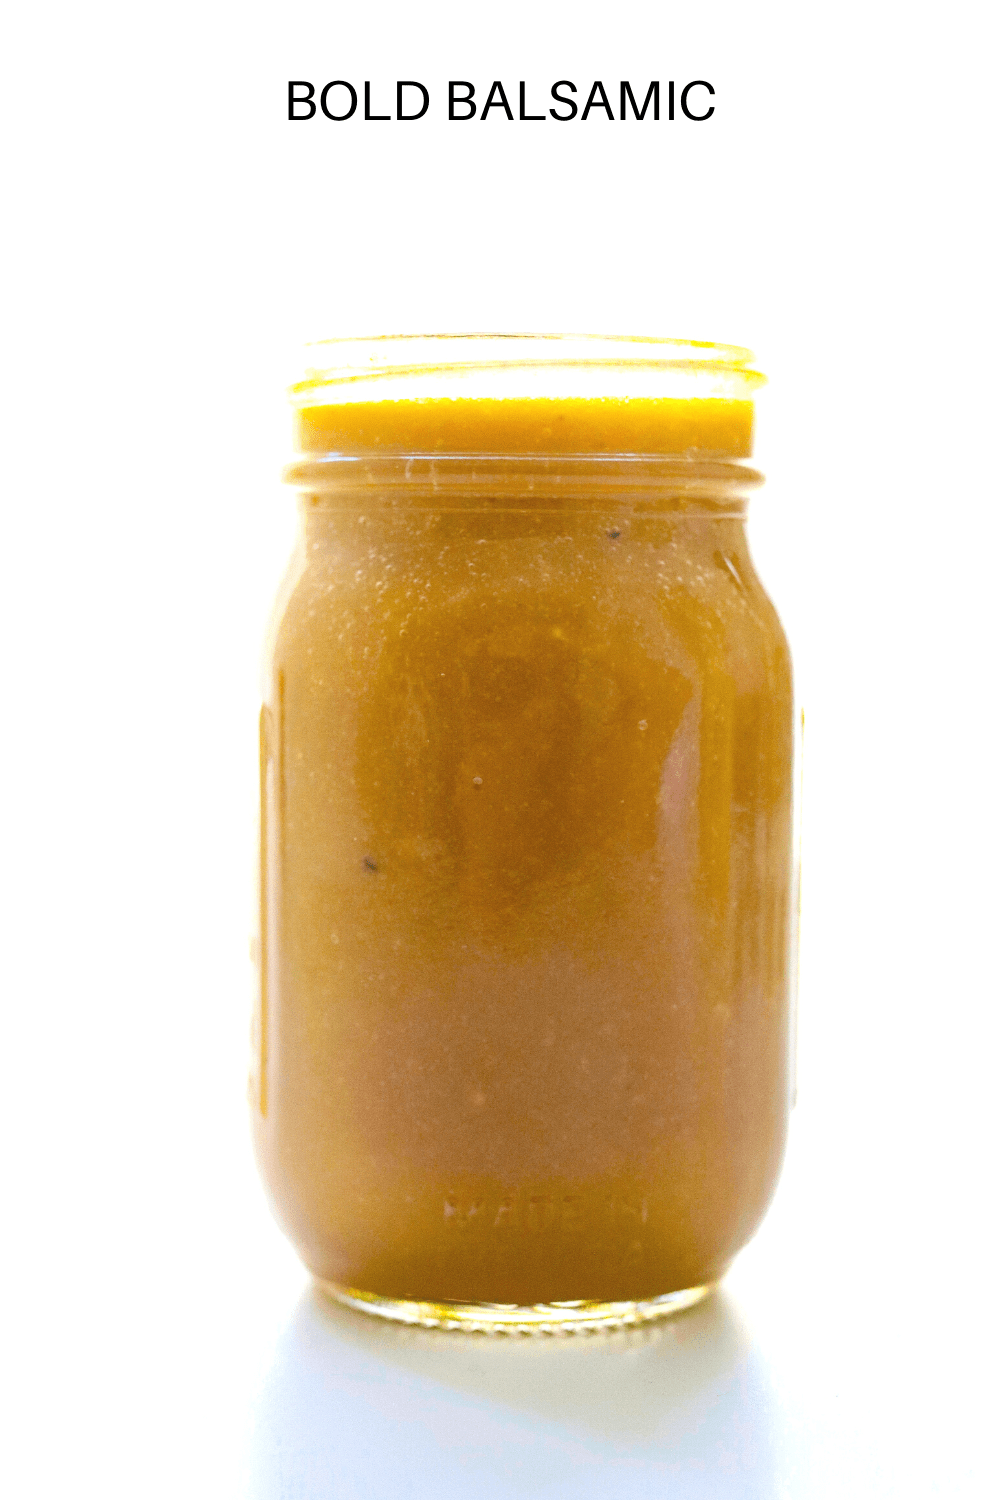 Balsamic dressing in a jar on a white surface